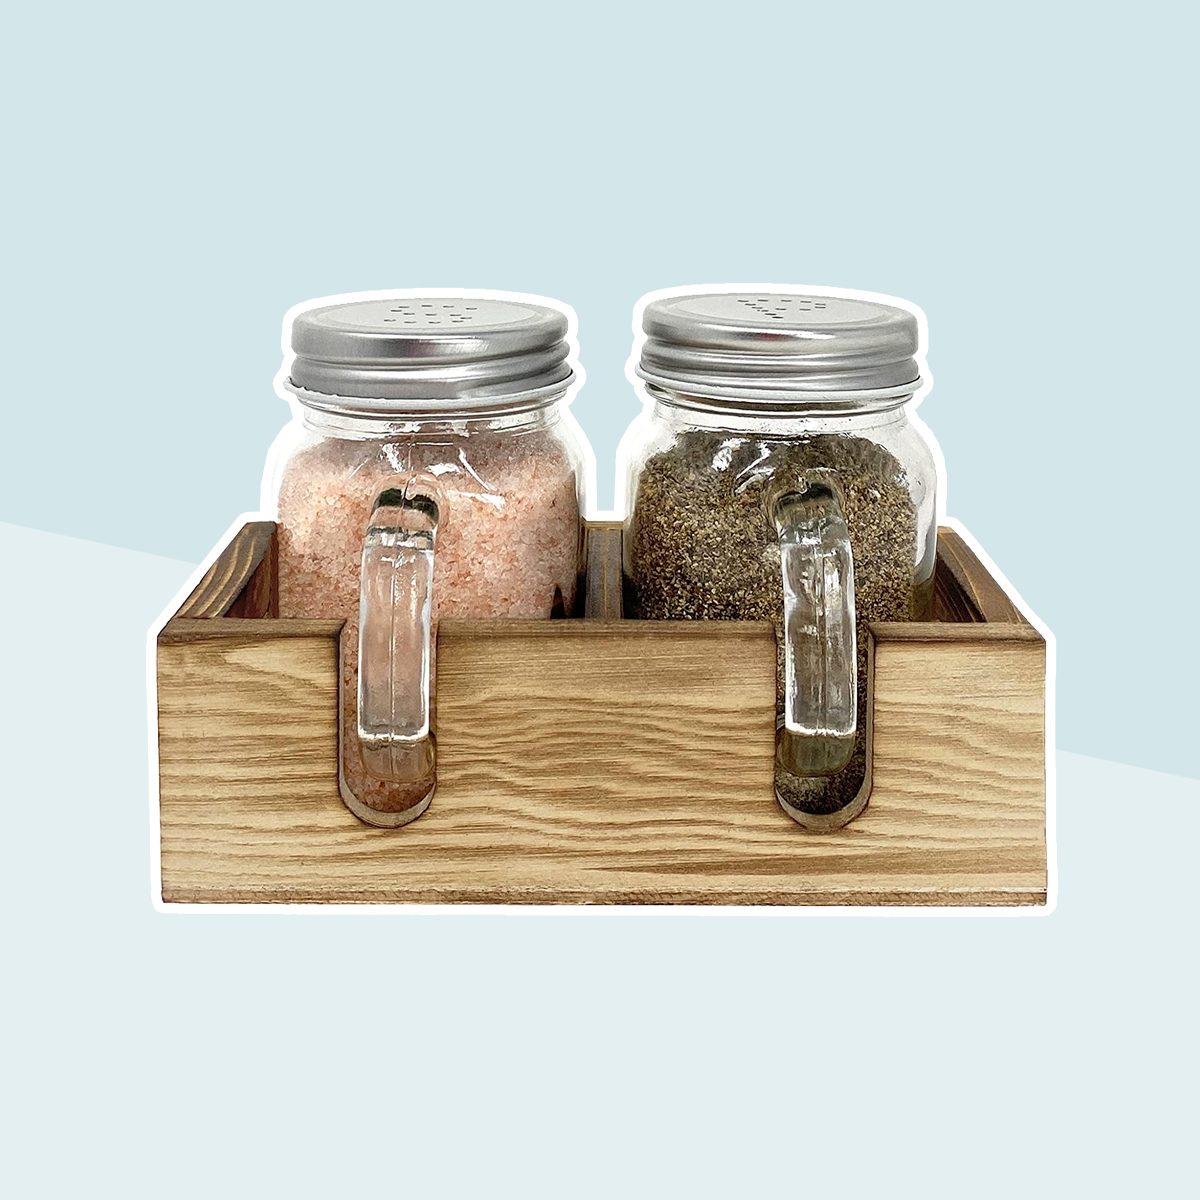 https://www.tasteofhome.com/wp-content/uploads/2021/09/ason-Jar-Salt-and-Pepper-Shakers-Set-with-Wood-Caddy.jpg?fit=700%2C700